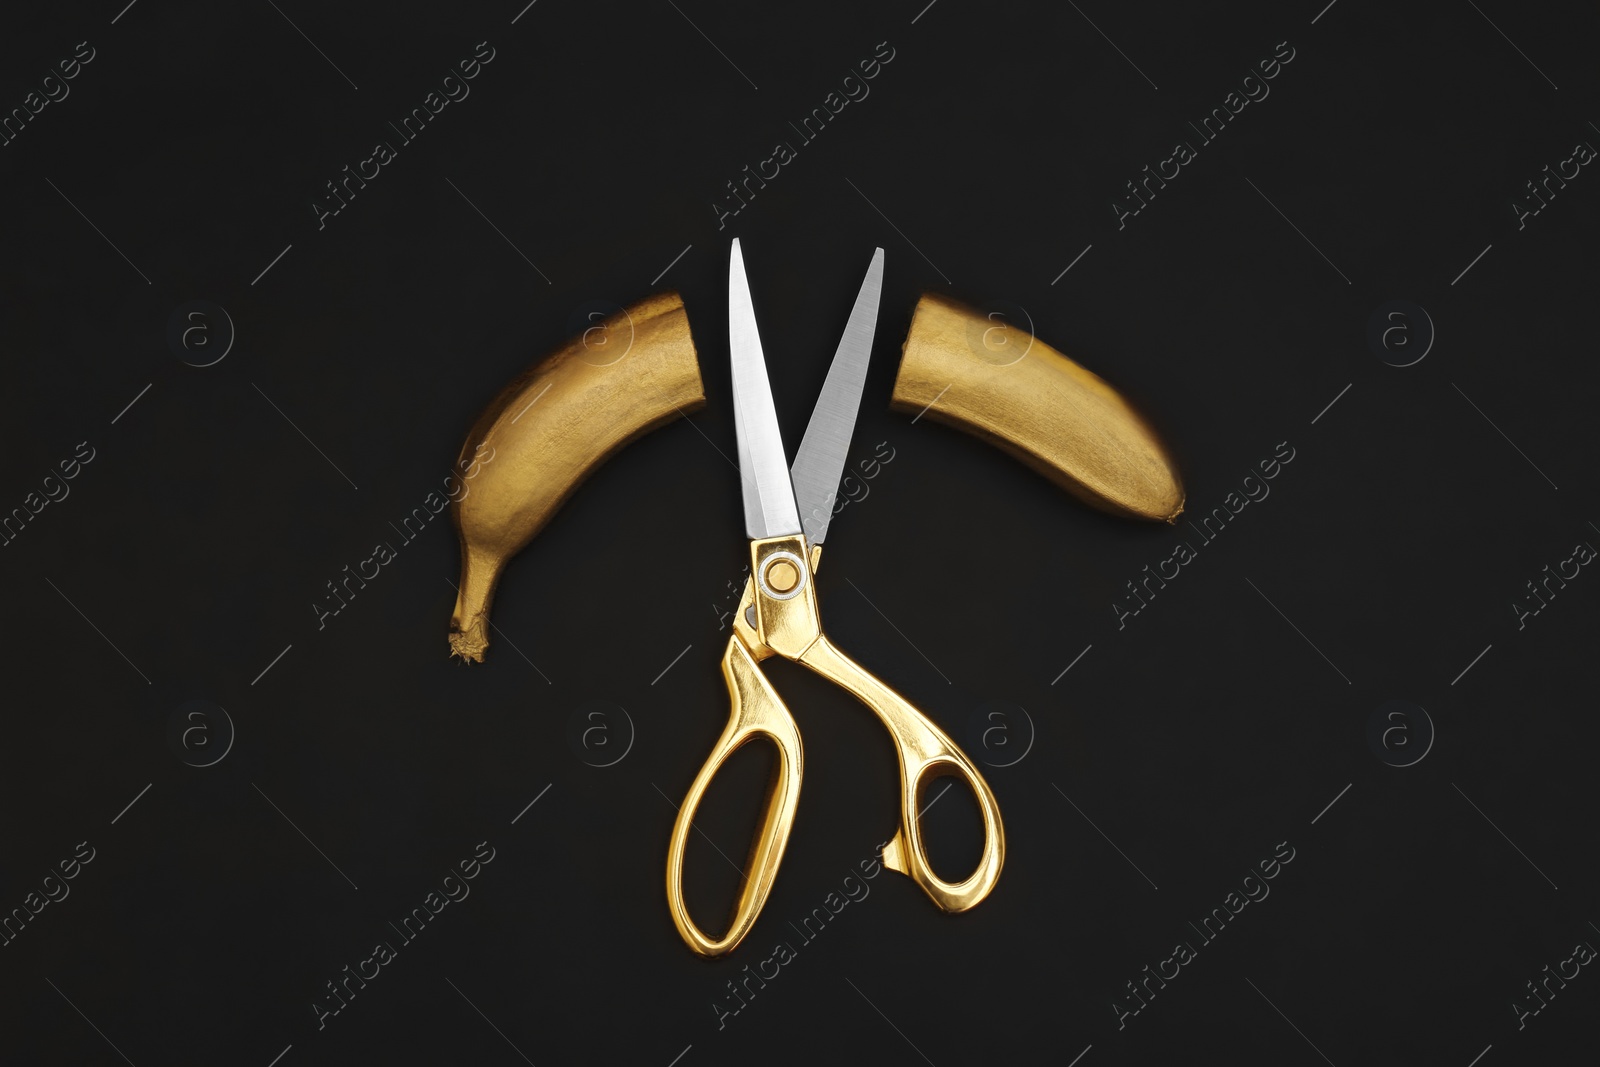 Photo of Gold painted cut banana and scissors on black background, flat lay